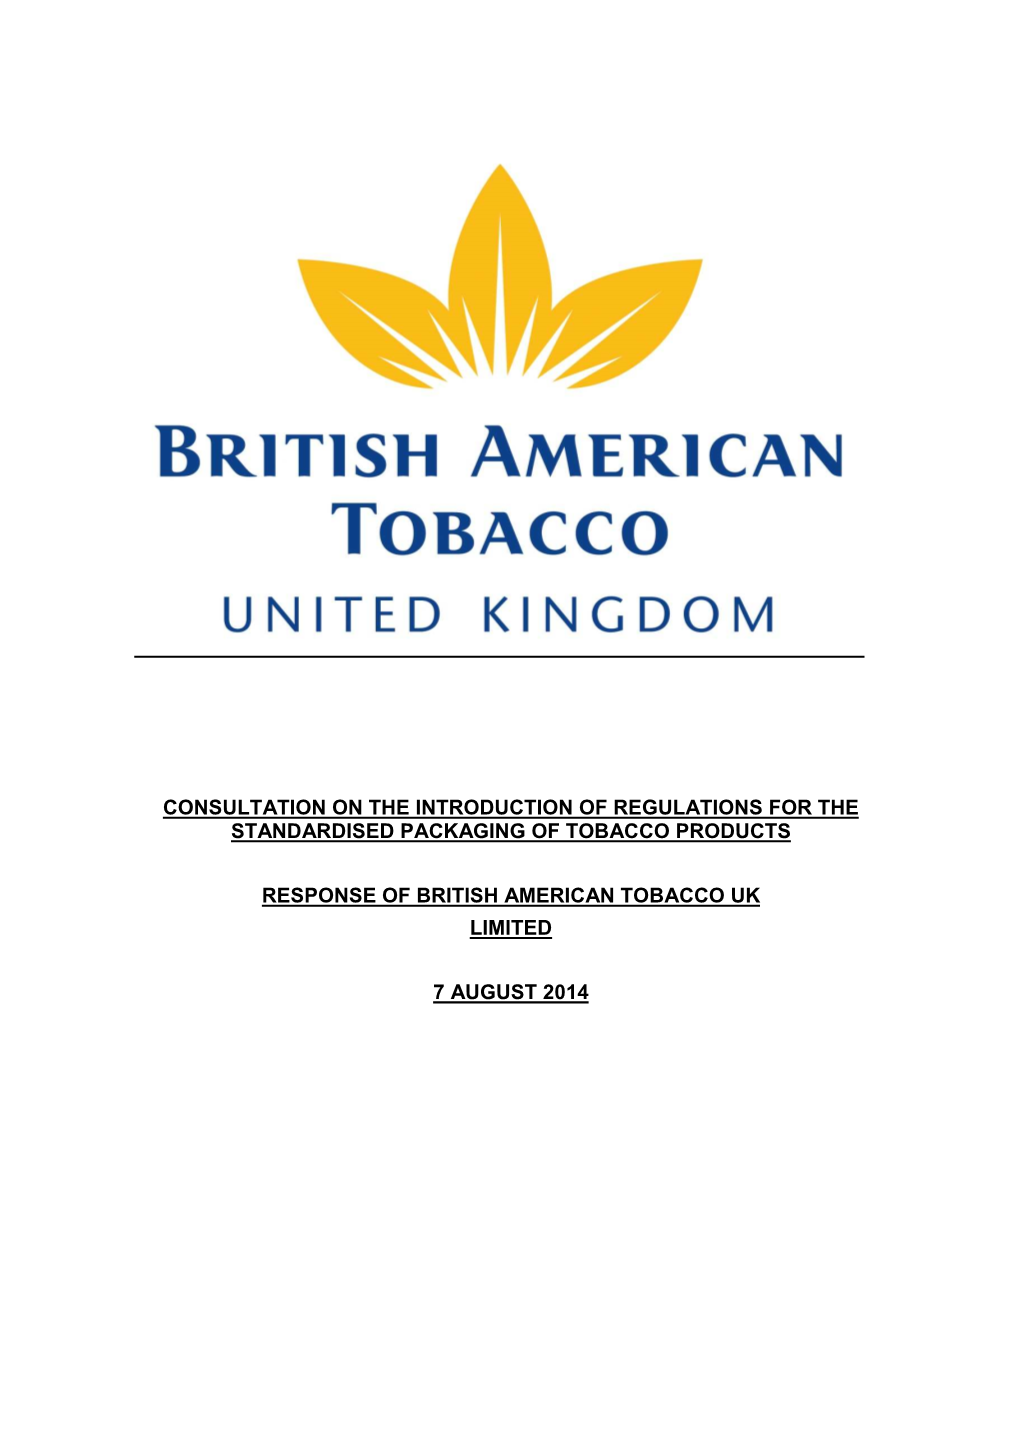 Consultation on the Introduction of Regulations for the Standardised Packaging of Tobacco Products